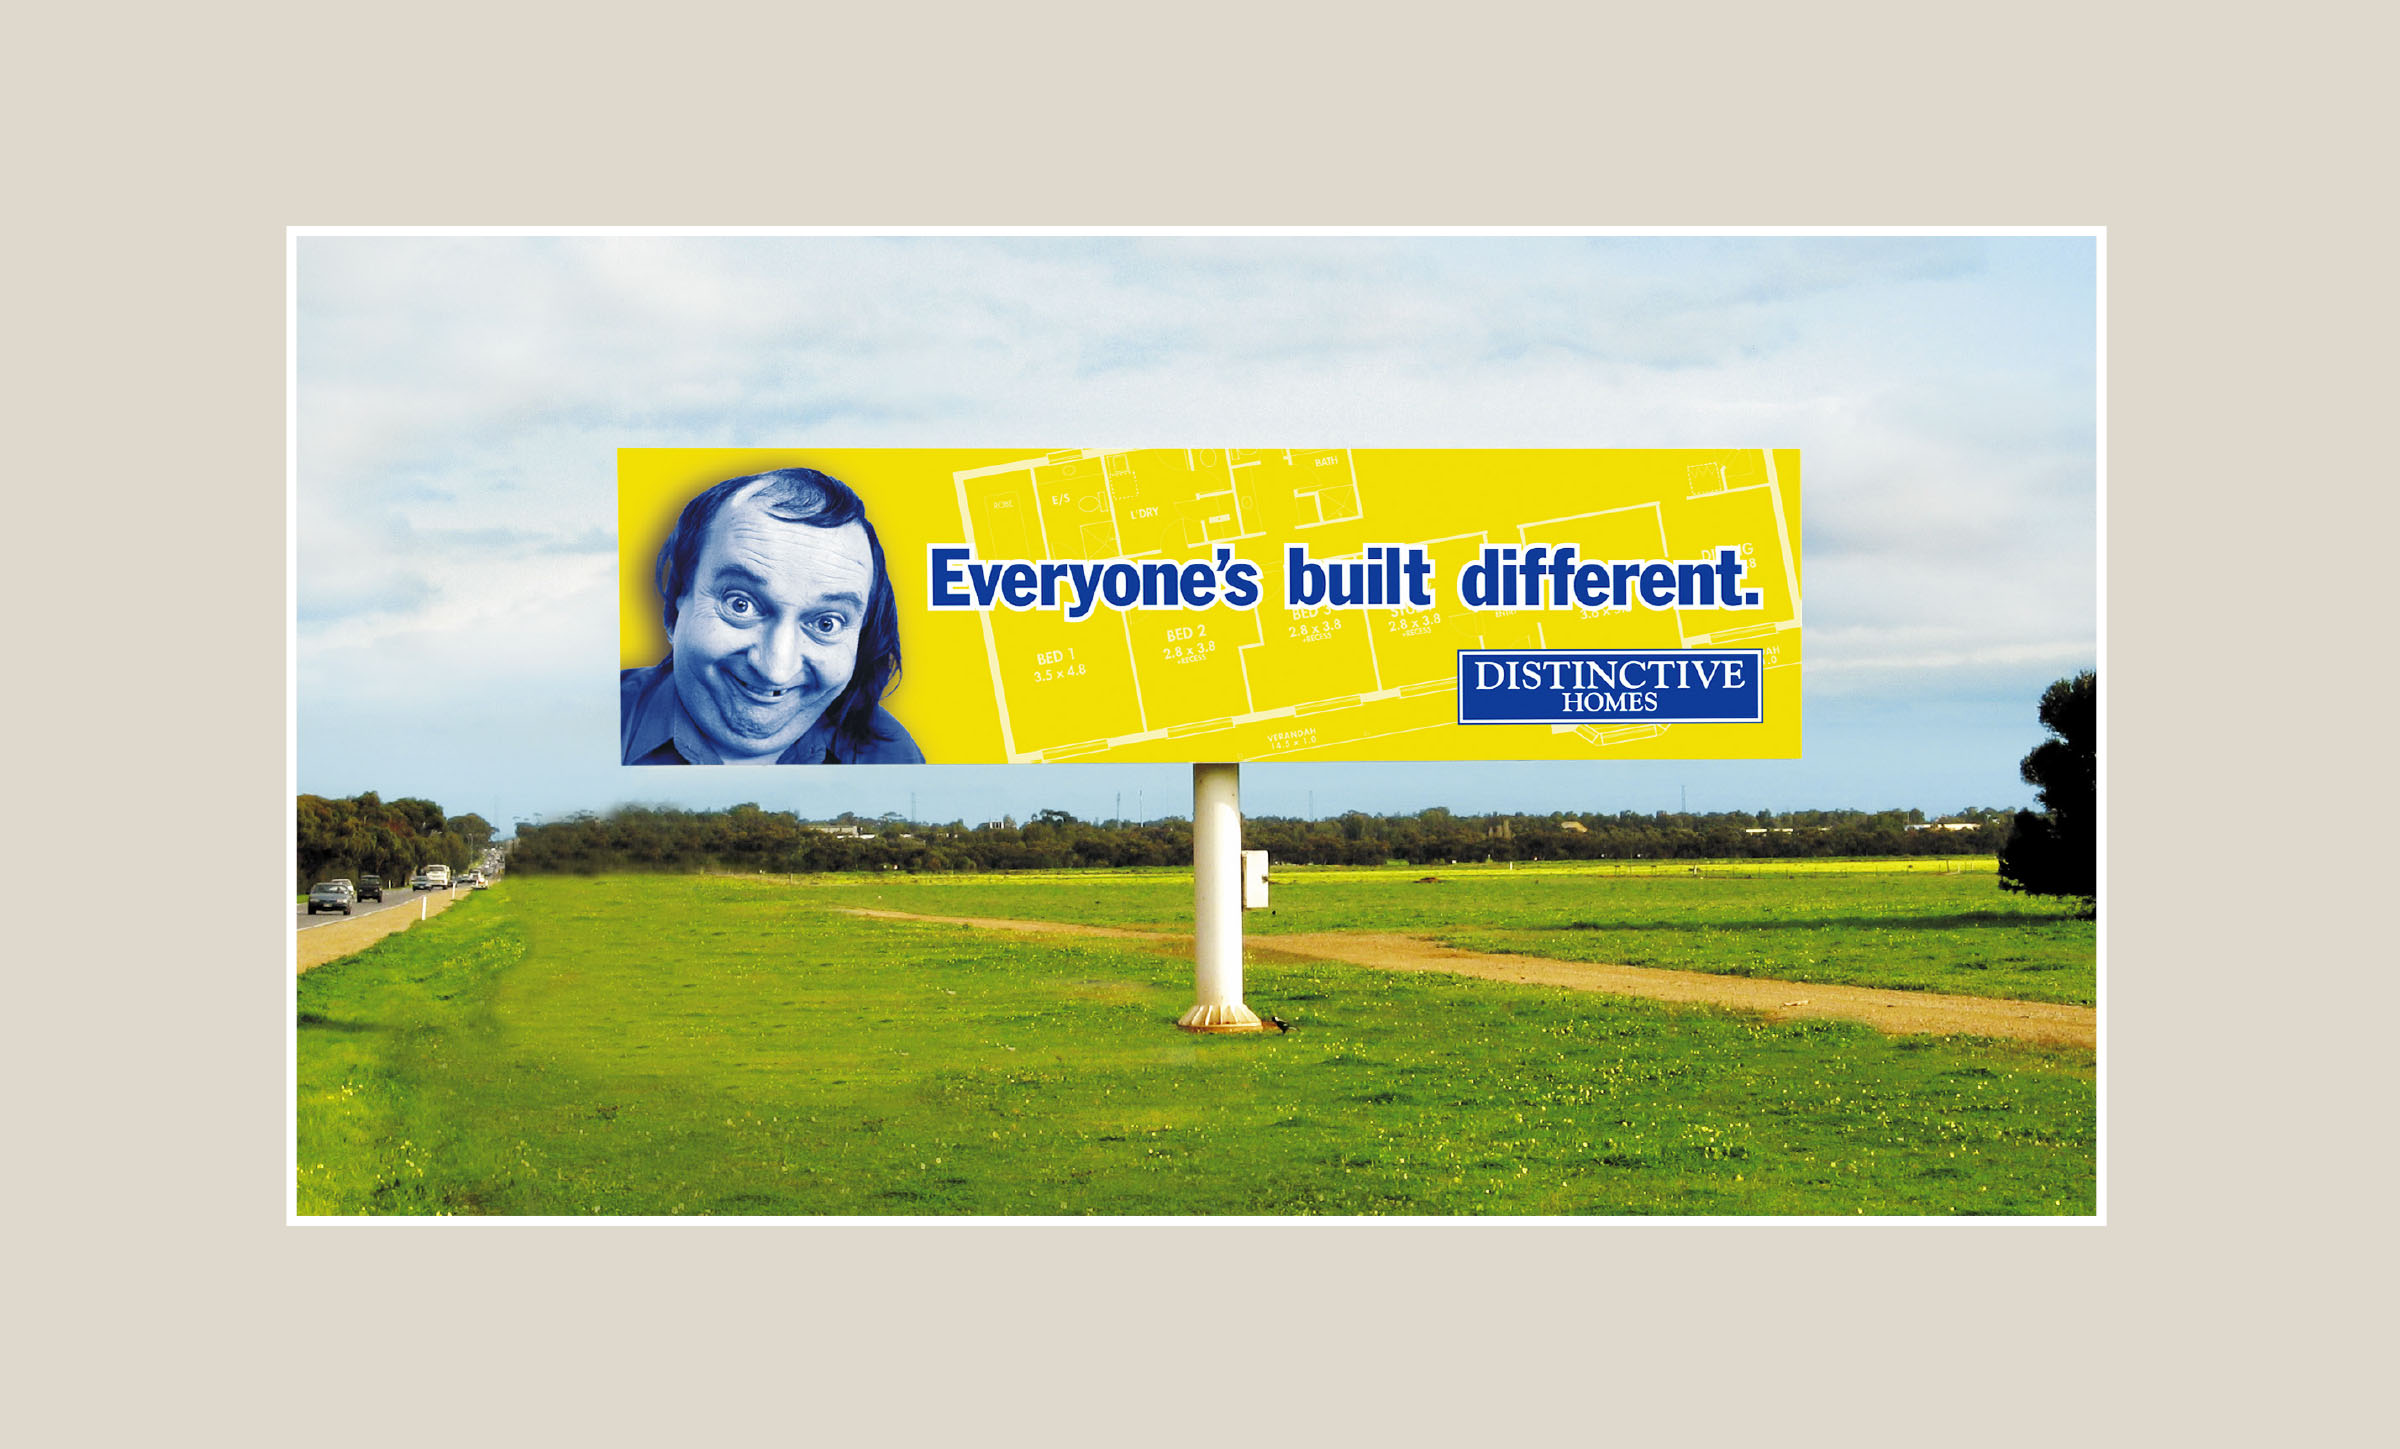 Distinctive Homes Advertising Campaign